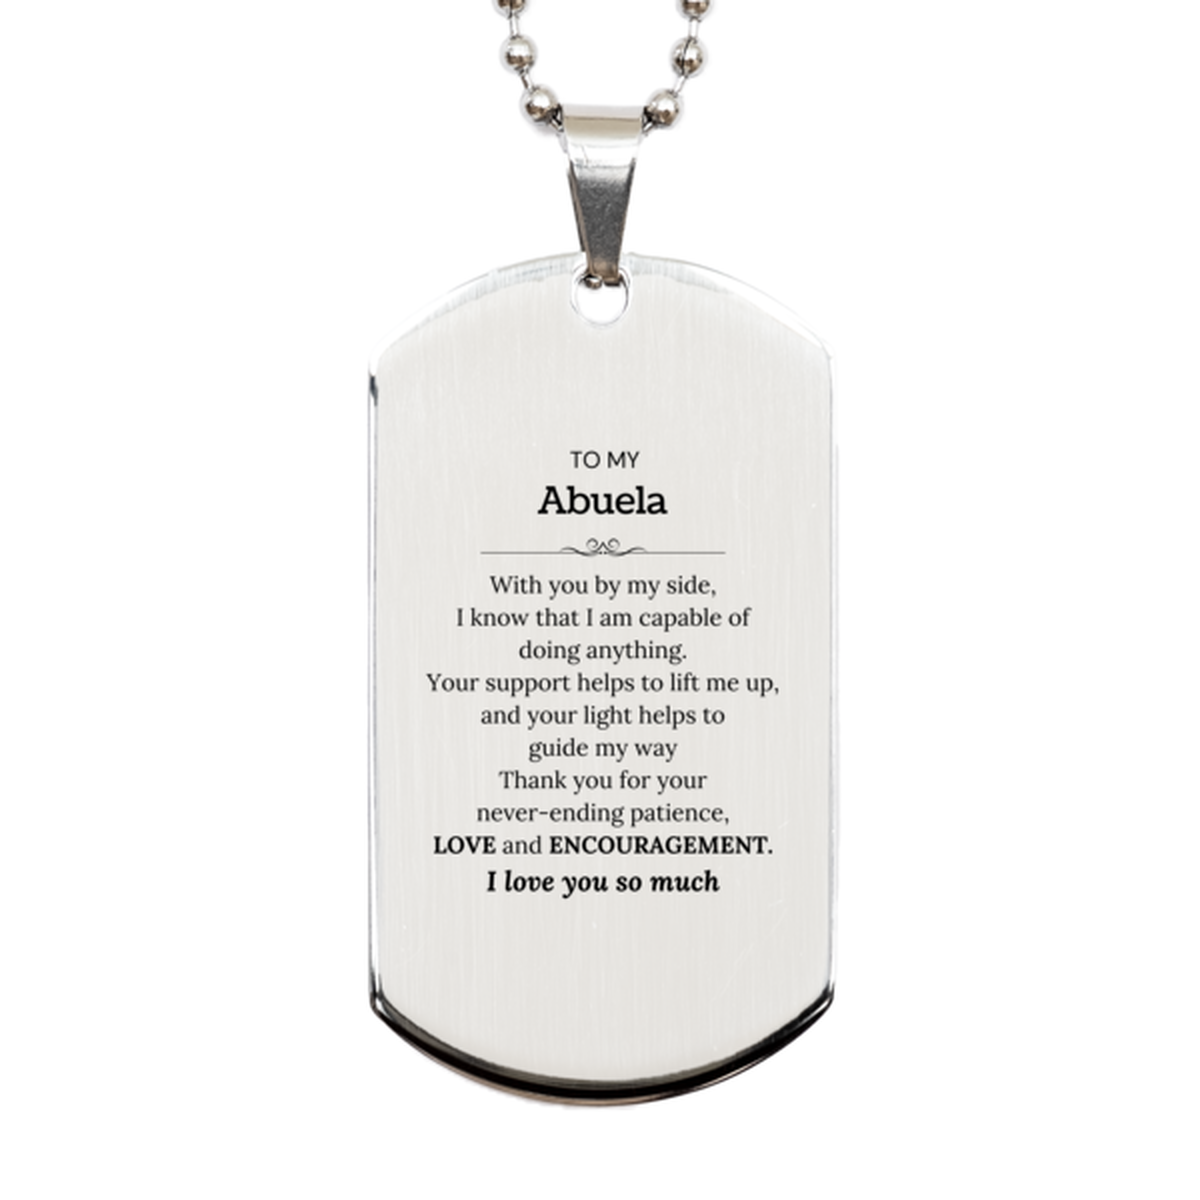 Appreciation Abuela Silver Dog Tag Gifts, To My Abuela Birthday Christmas Wedding Keepsake Gifts for Abuela With you by my side, I know that I am capable of doing anything. I love you so much